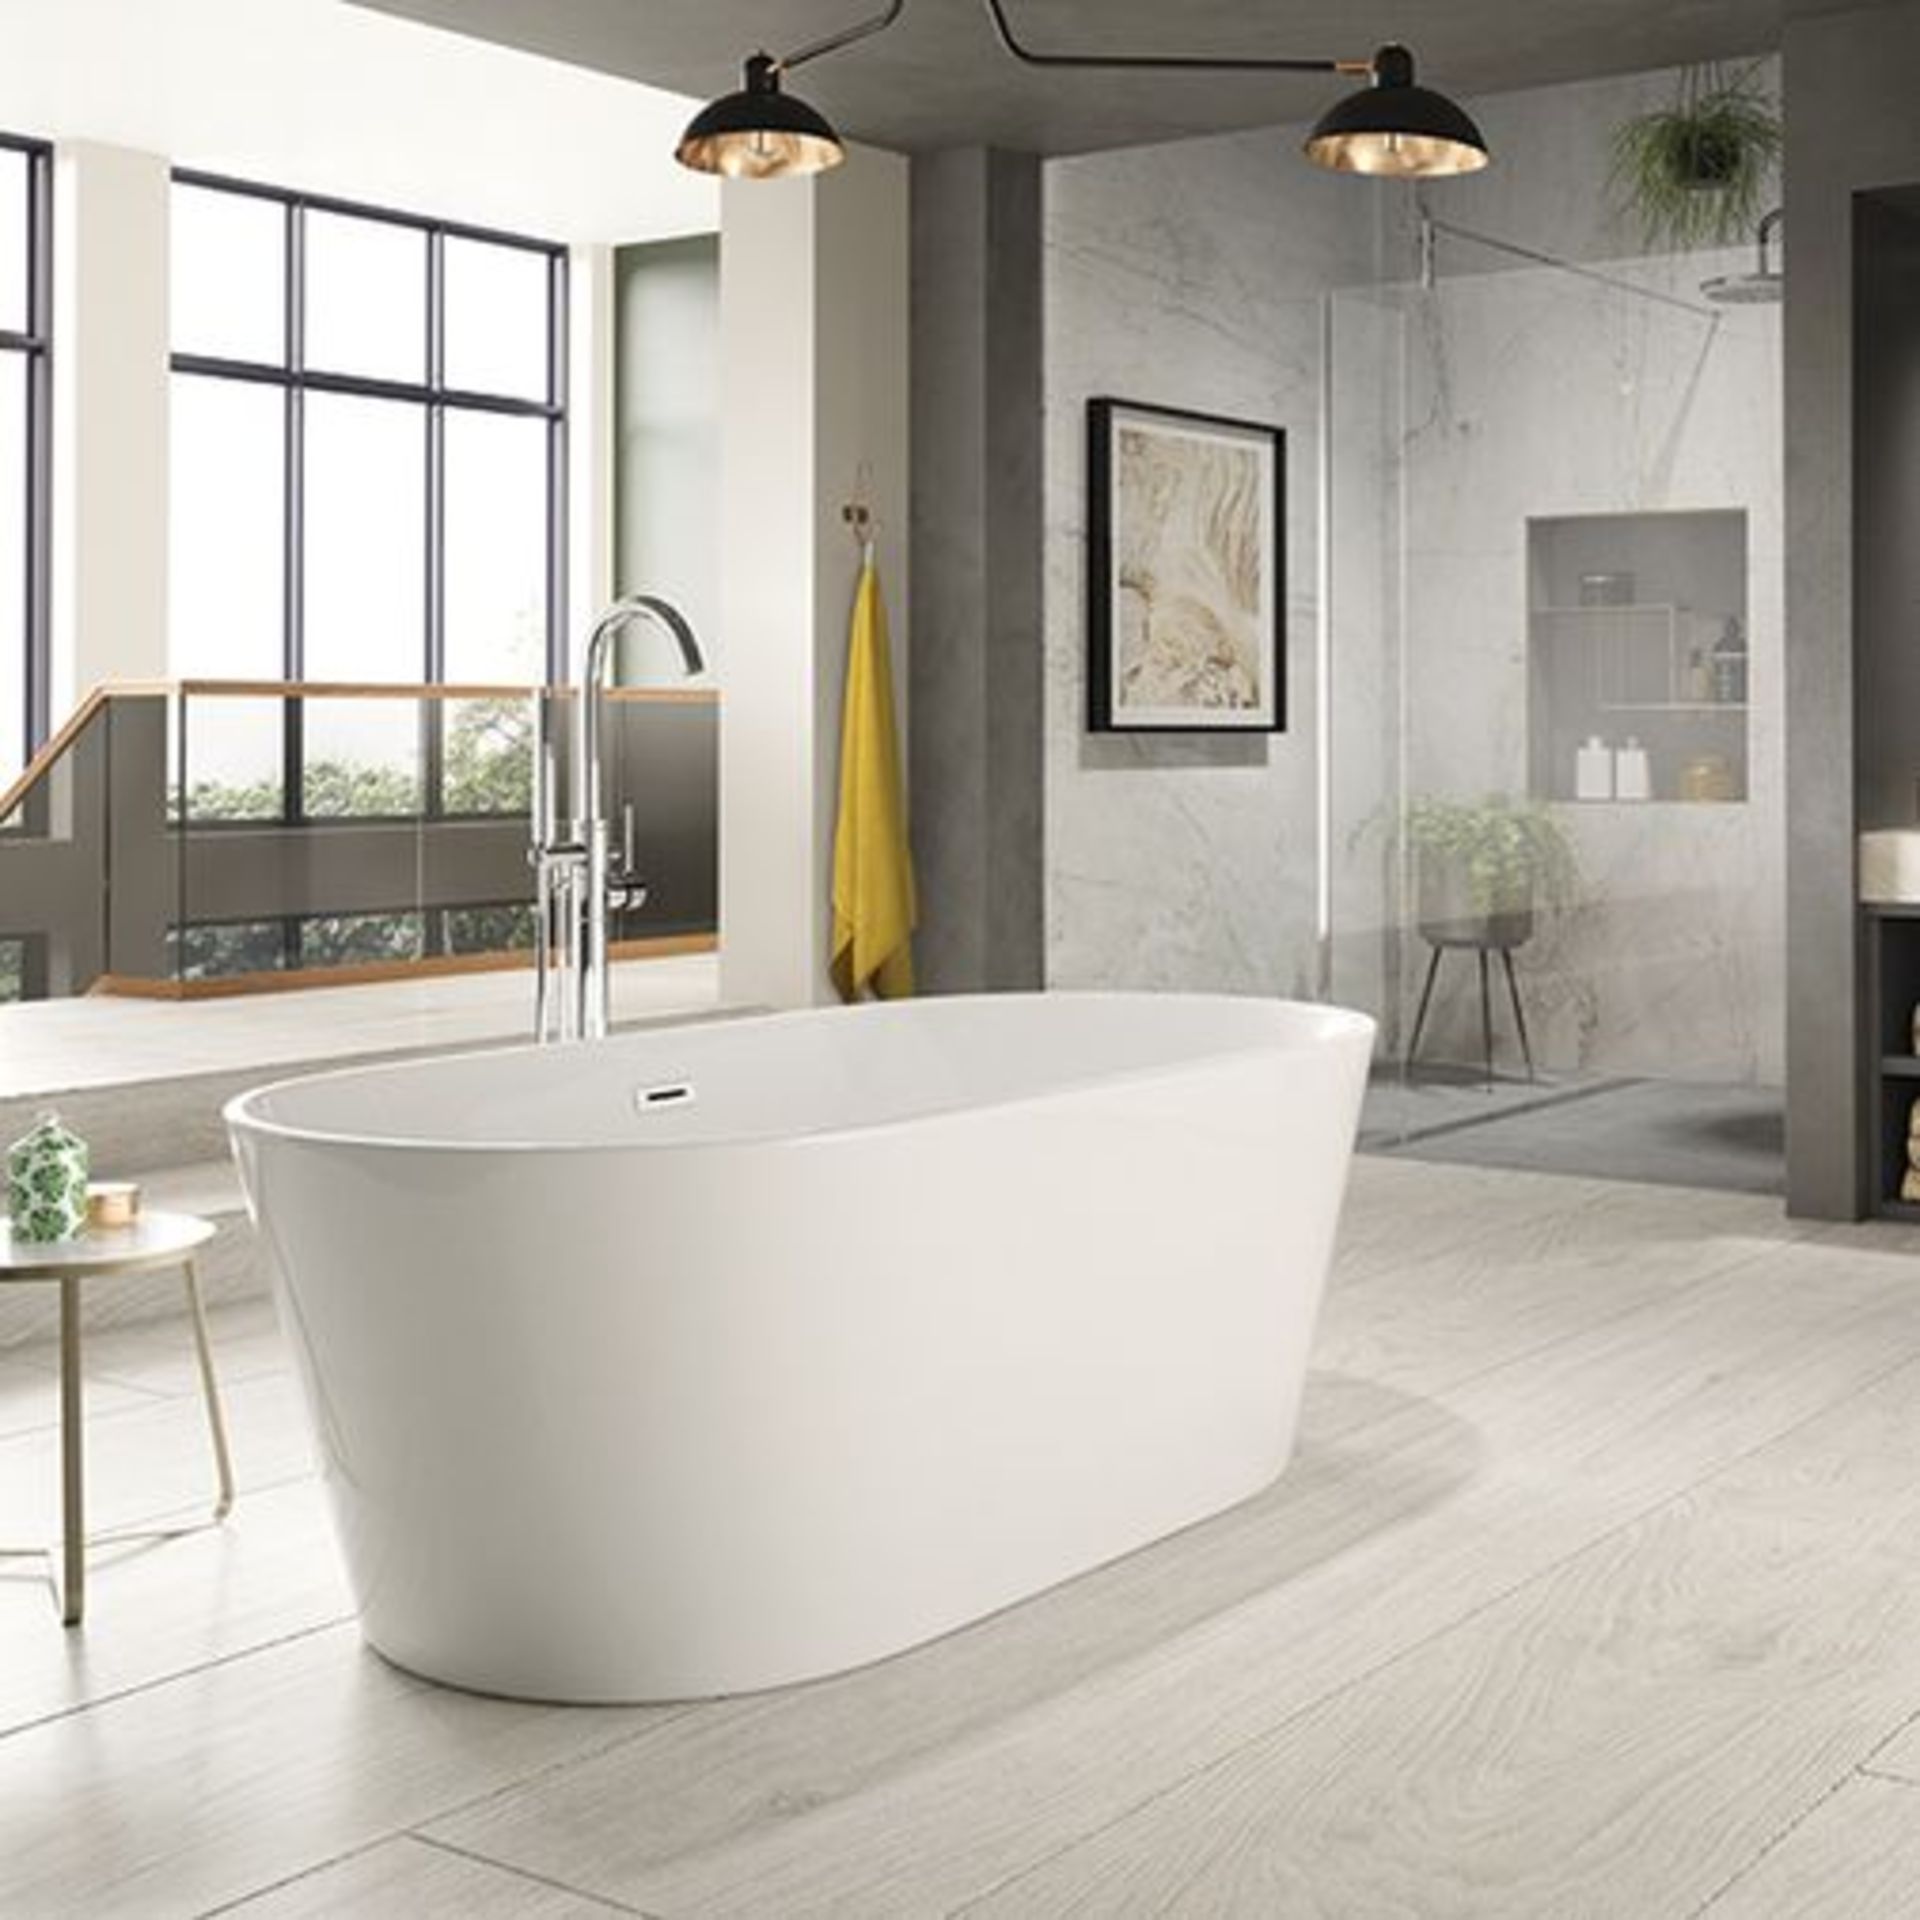 NEWTON 1700 X 800MM MODERN FREE STANDING BATH. NEW, PACKAGED & UNUSED RRP £860.00 - Image 2 of 4